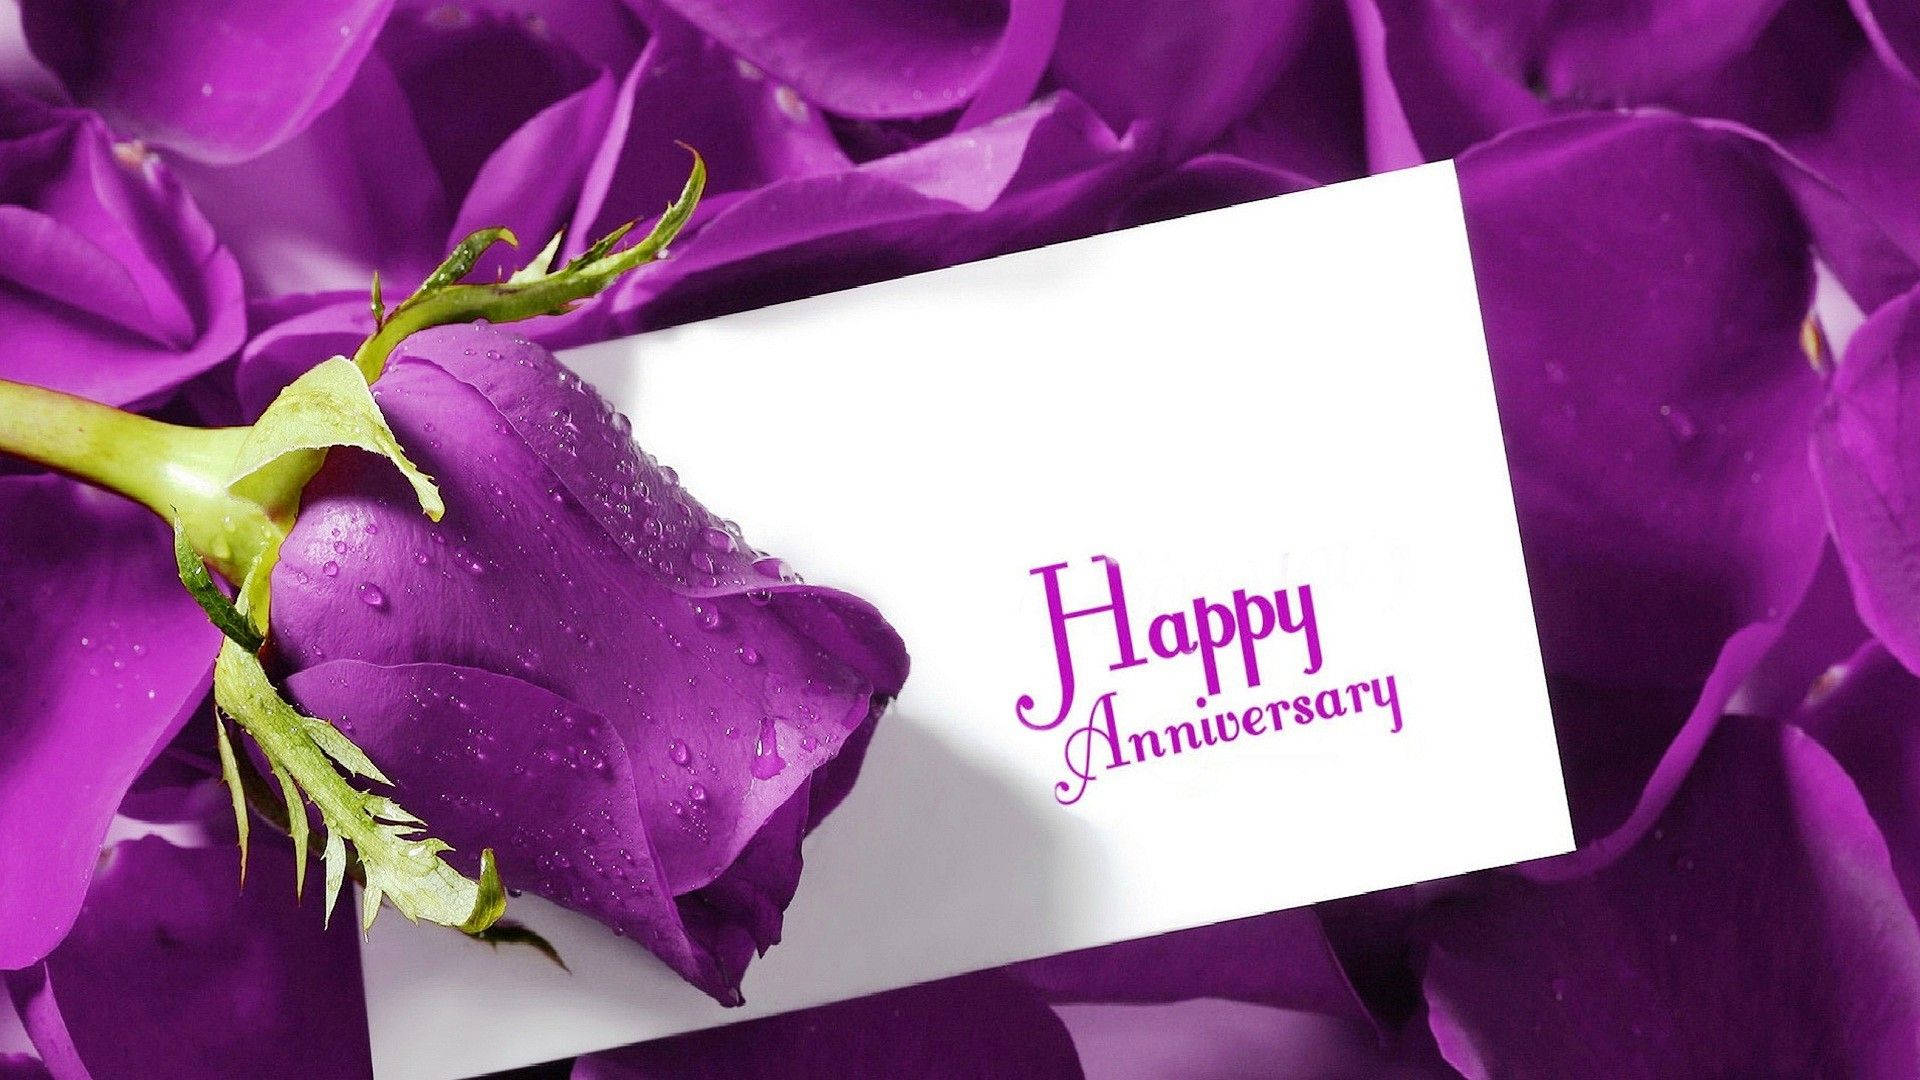 Happy Anniversary Letter With Purple Rose